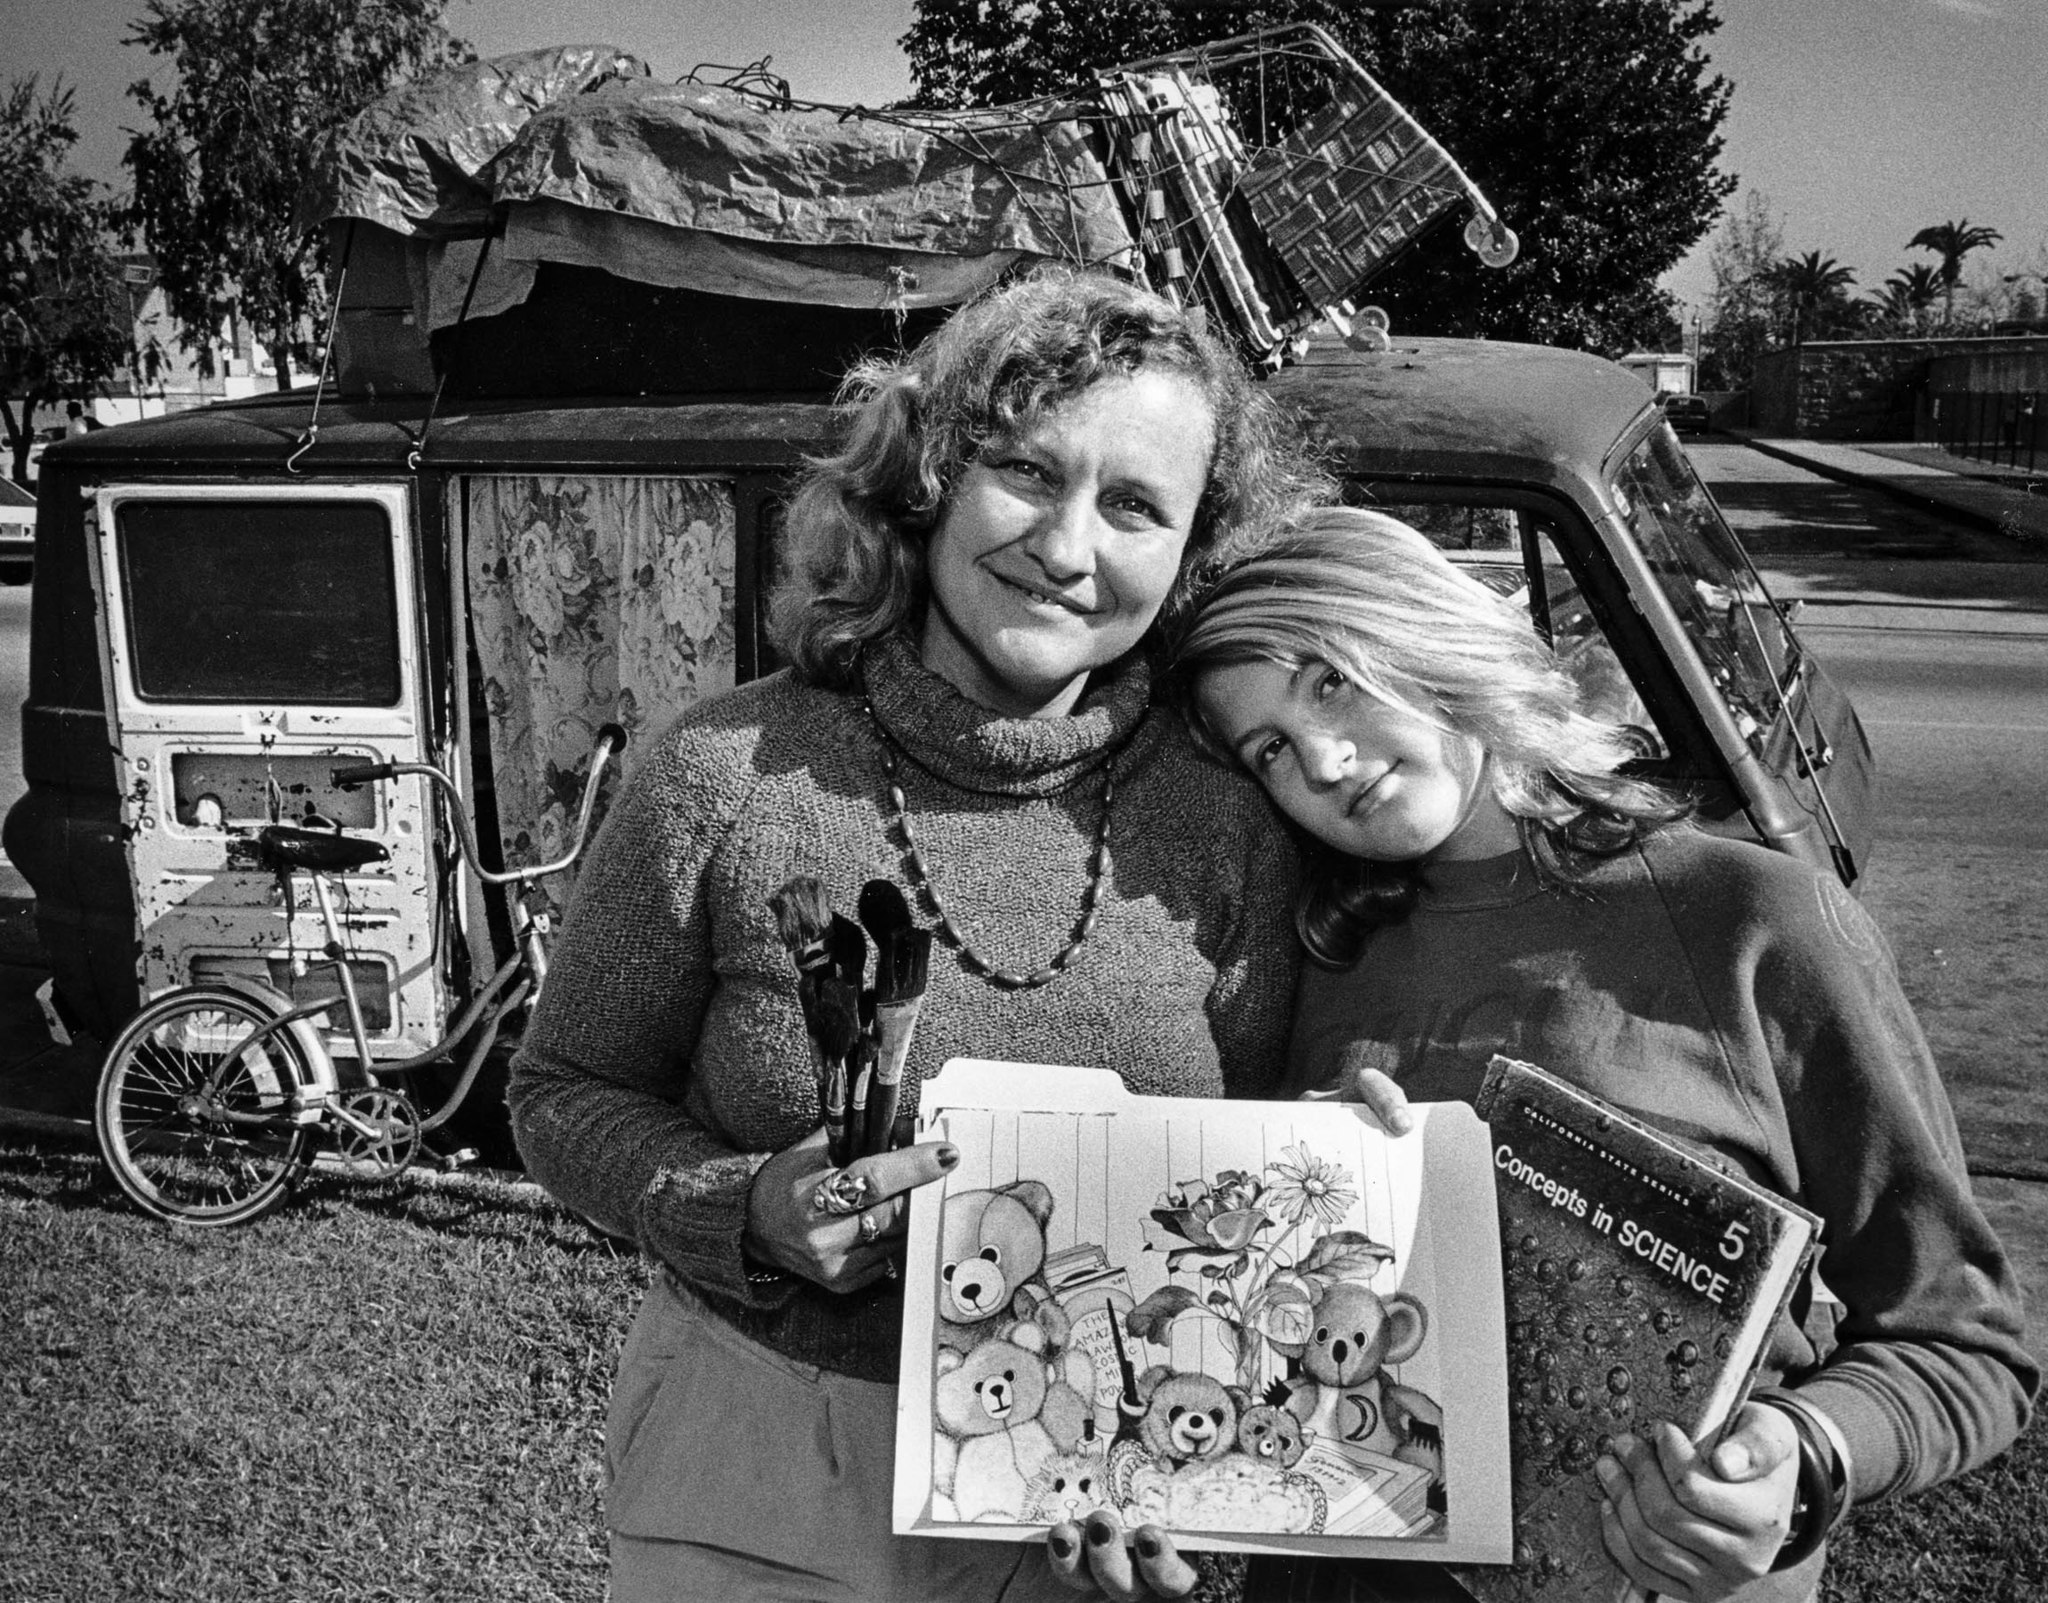 Jan. 12, 1987: Geneva Reese, 36, and daughter Eve, 13, live in a van. Geneva, an artist, holds her s